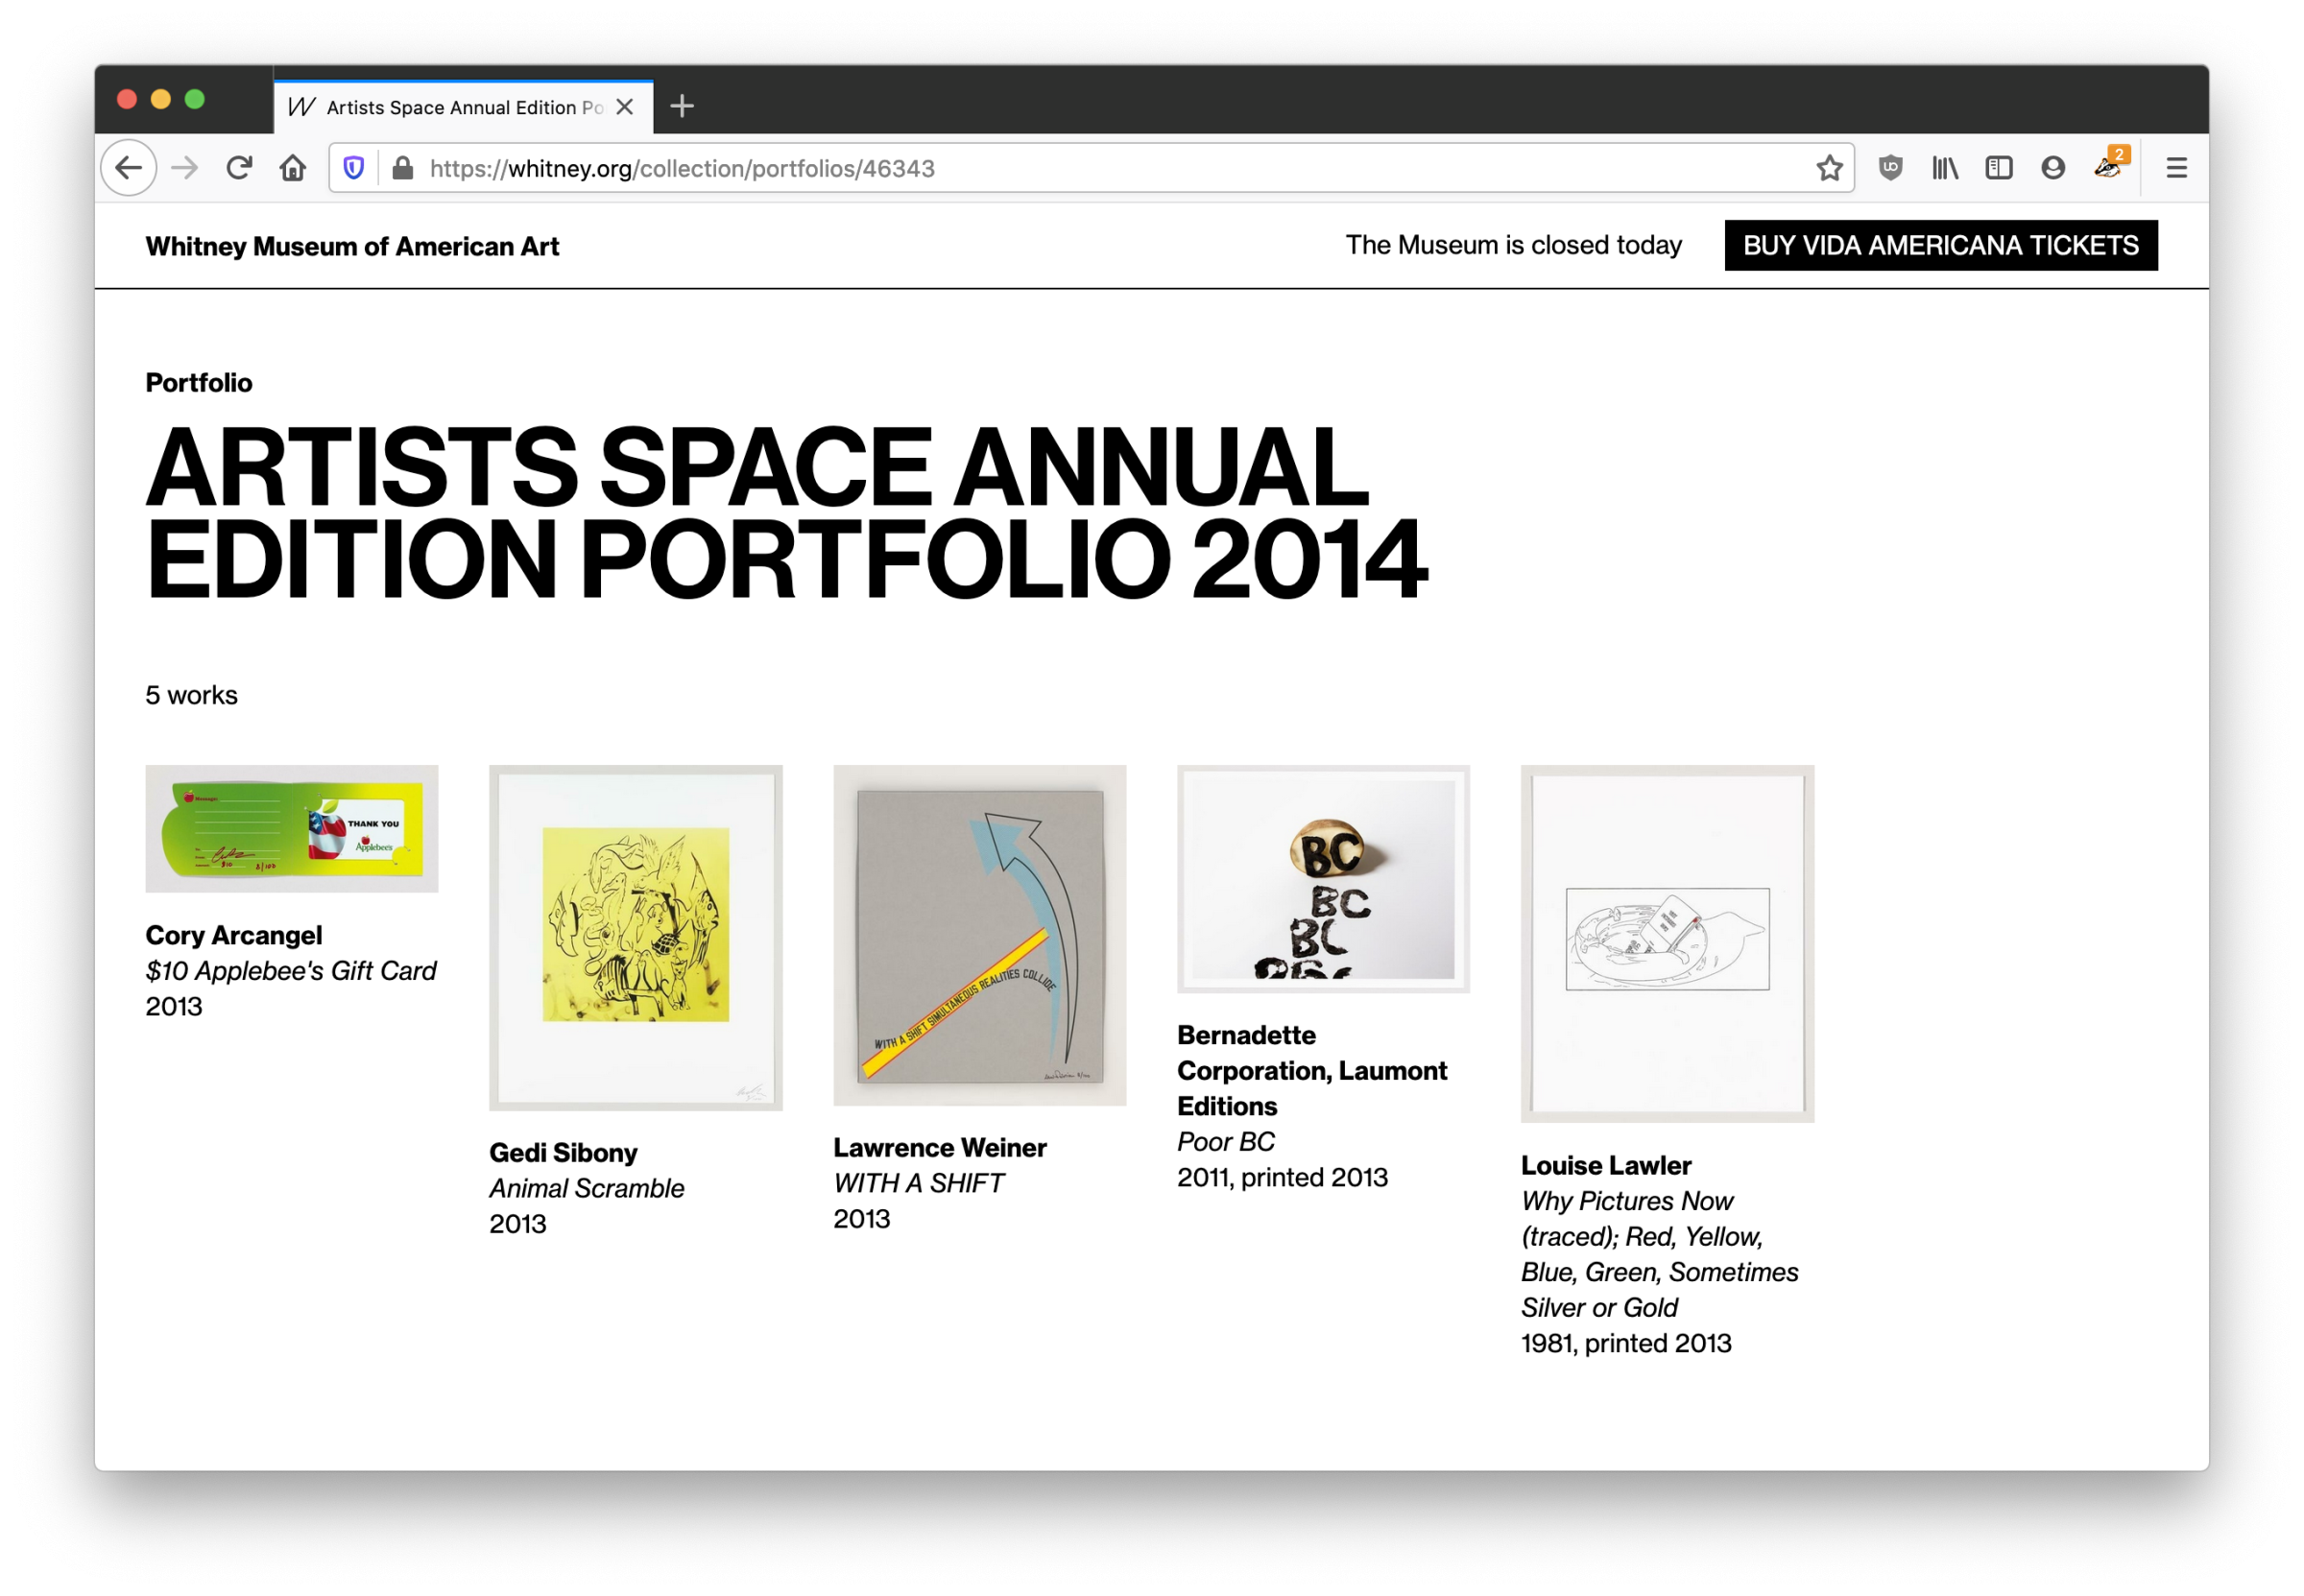 Screenshot of Artists Space Annual Edition Portfolio 2014 on the whitney.org online collection, with 5 works visible.